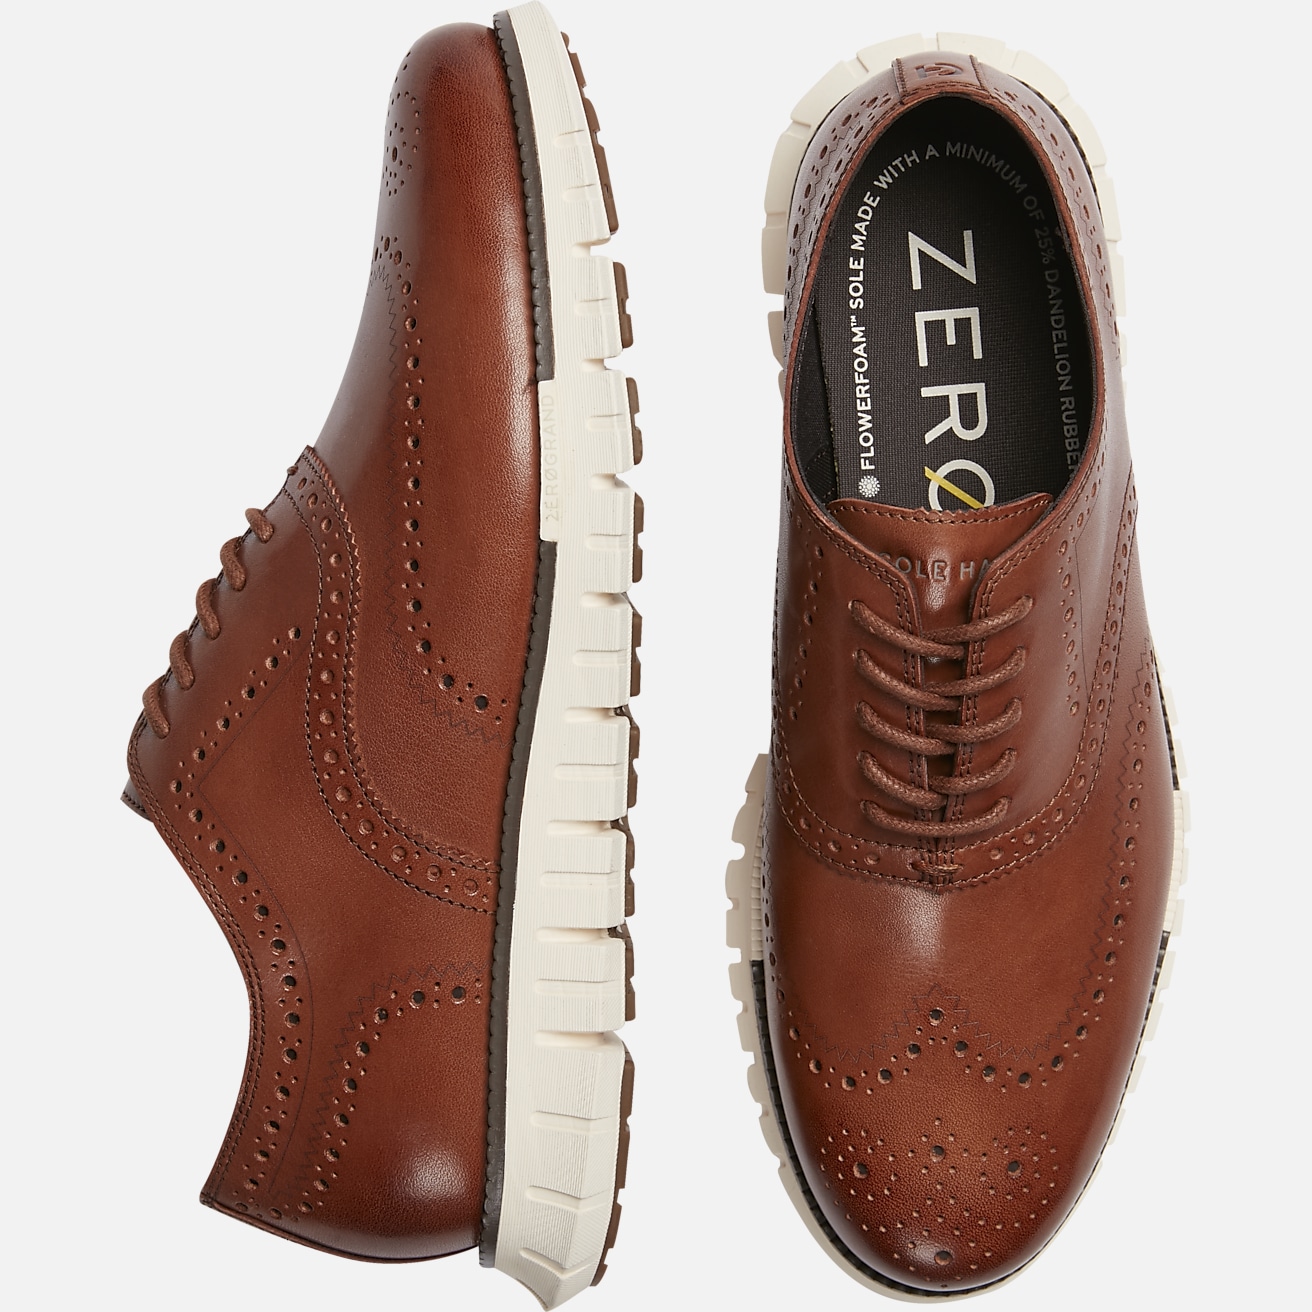 Cole Haan Zerogrand Remastered Wingtip Oxford Dress Sneakers, Casual Shoes